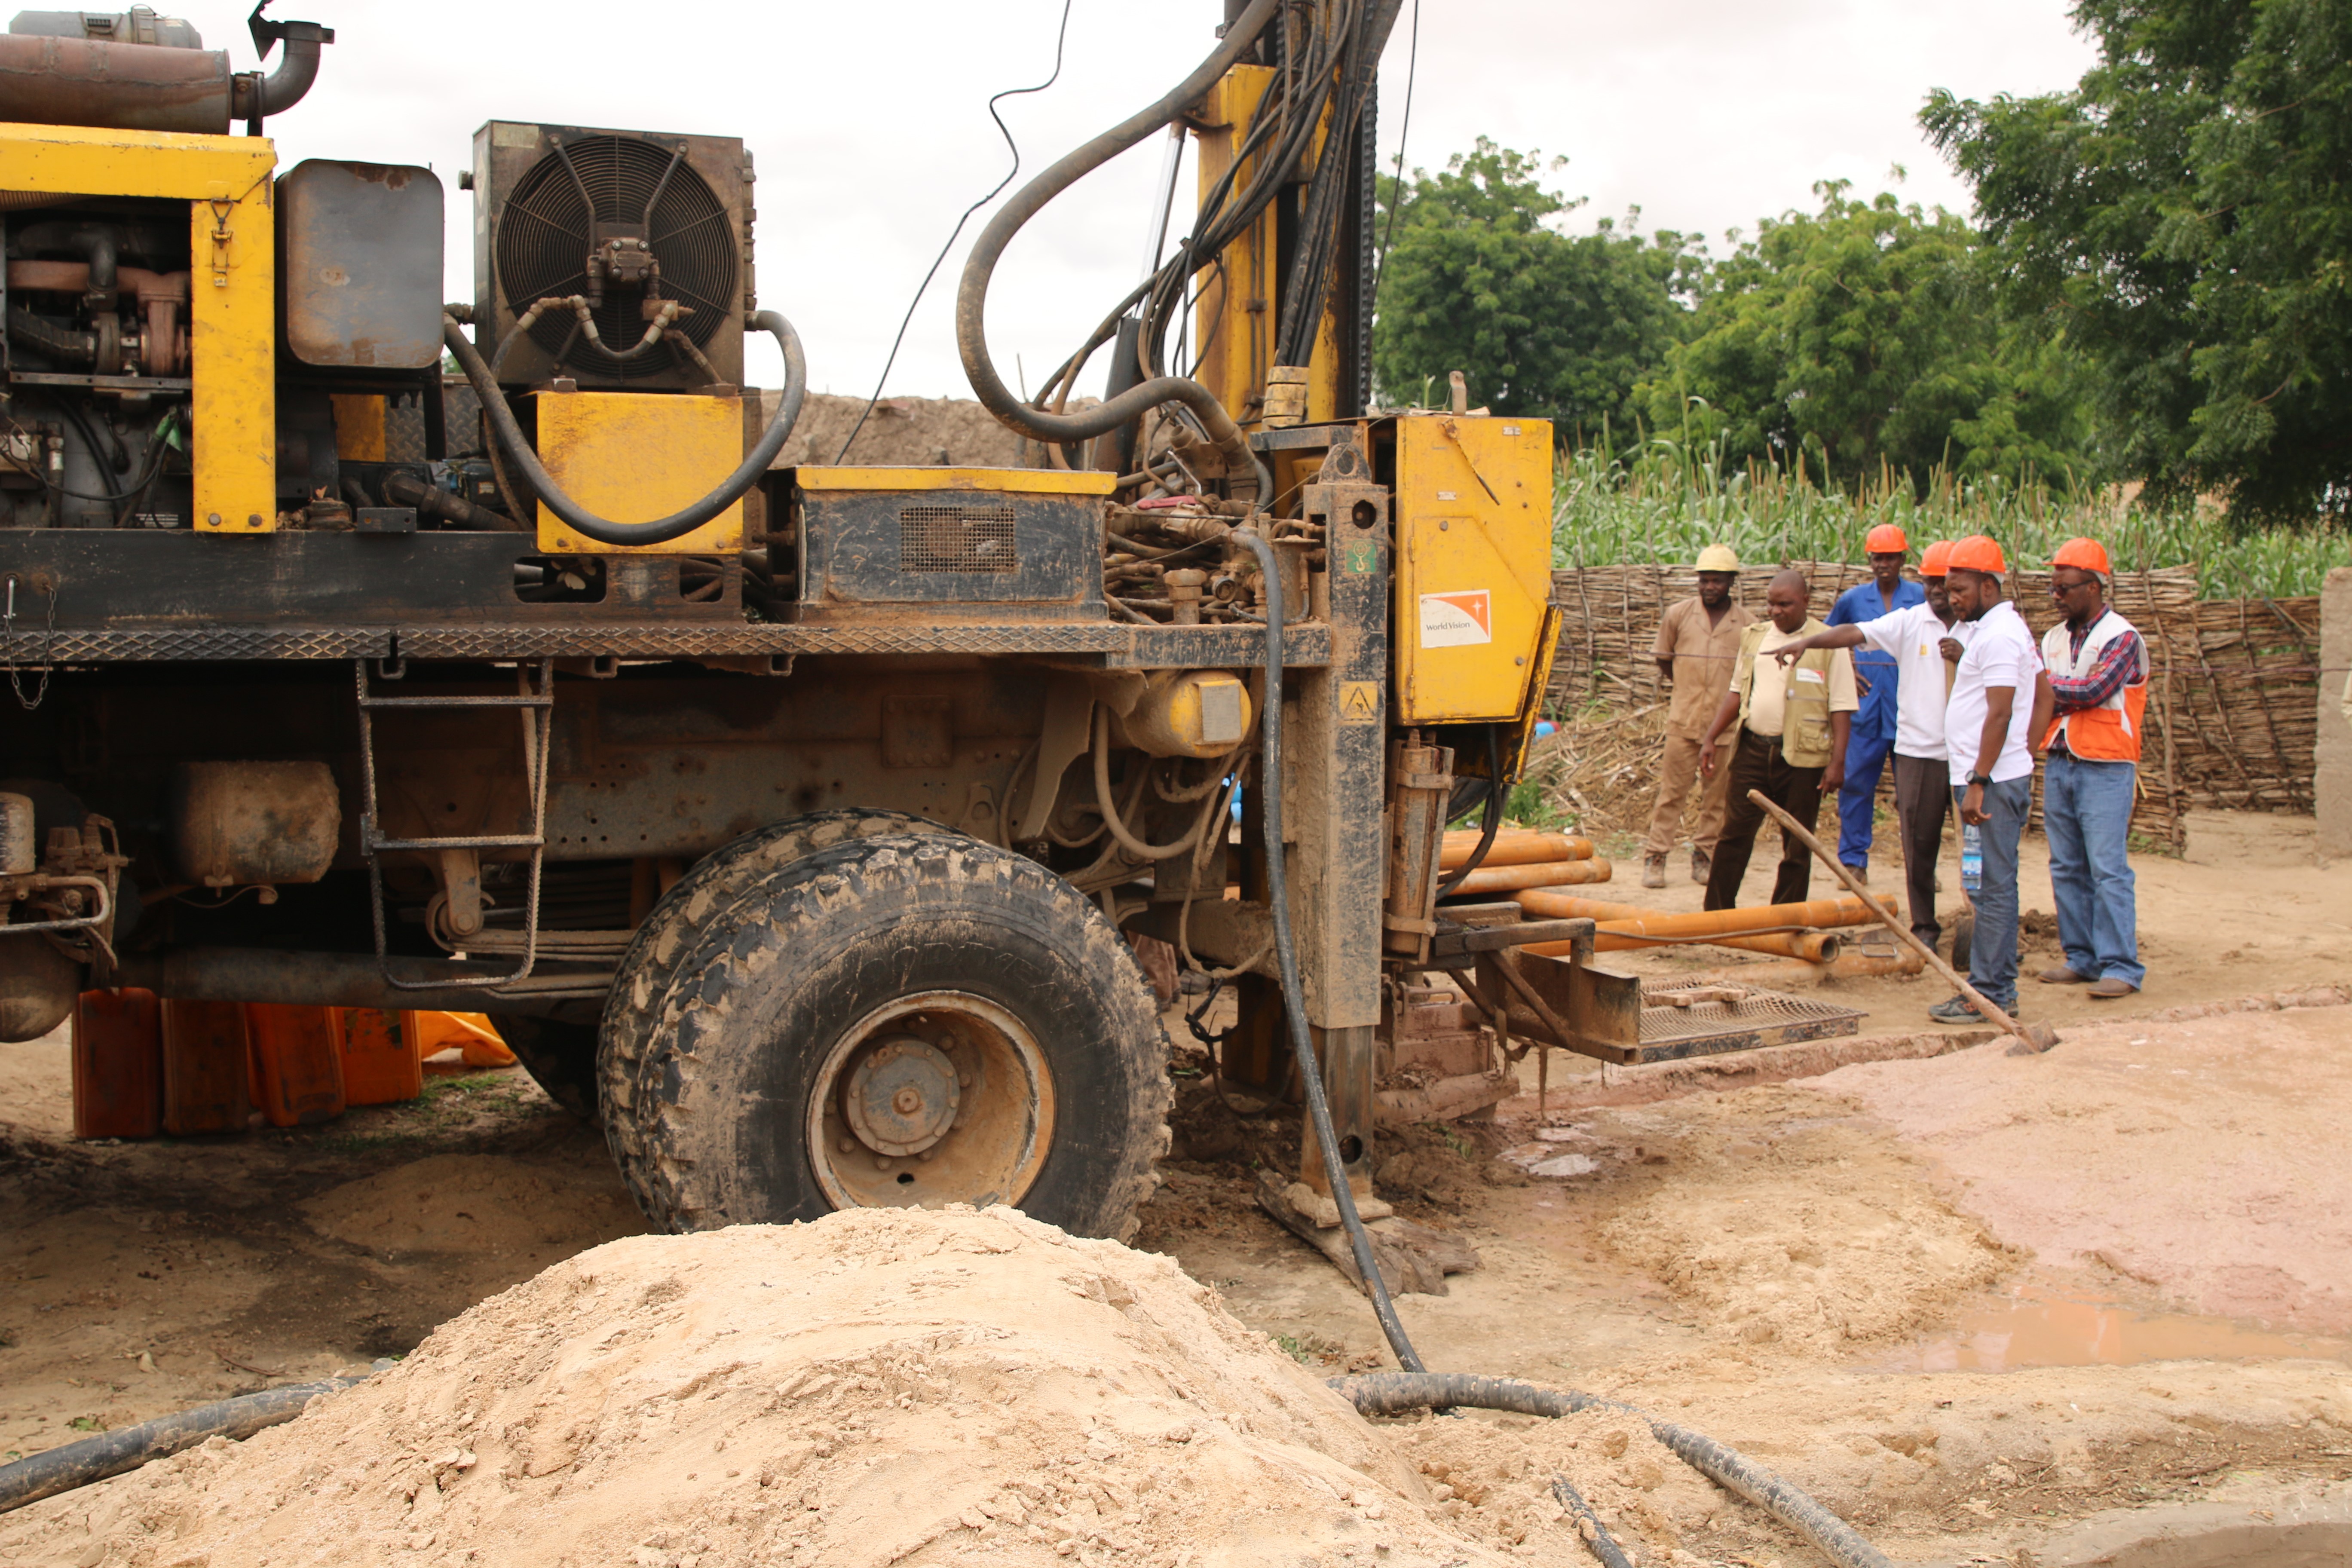 World Vision Niger's management team learns how to drill